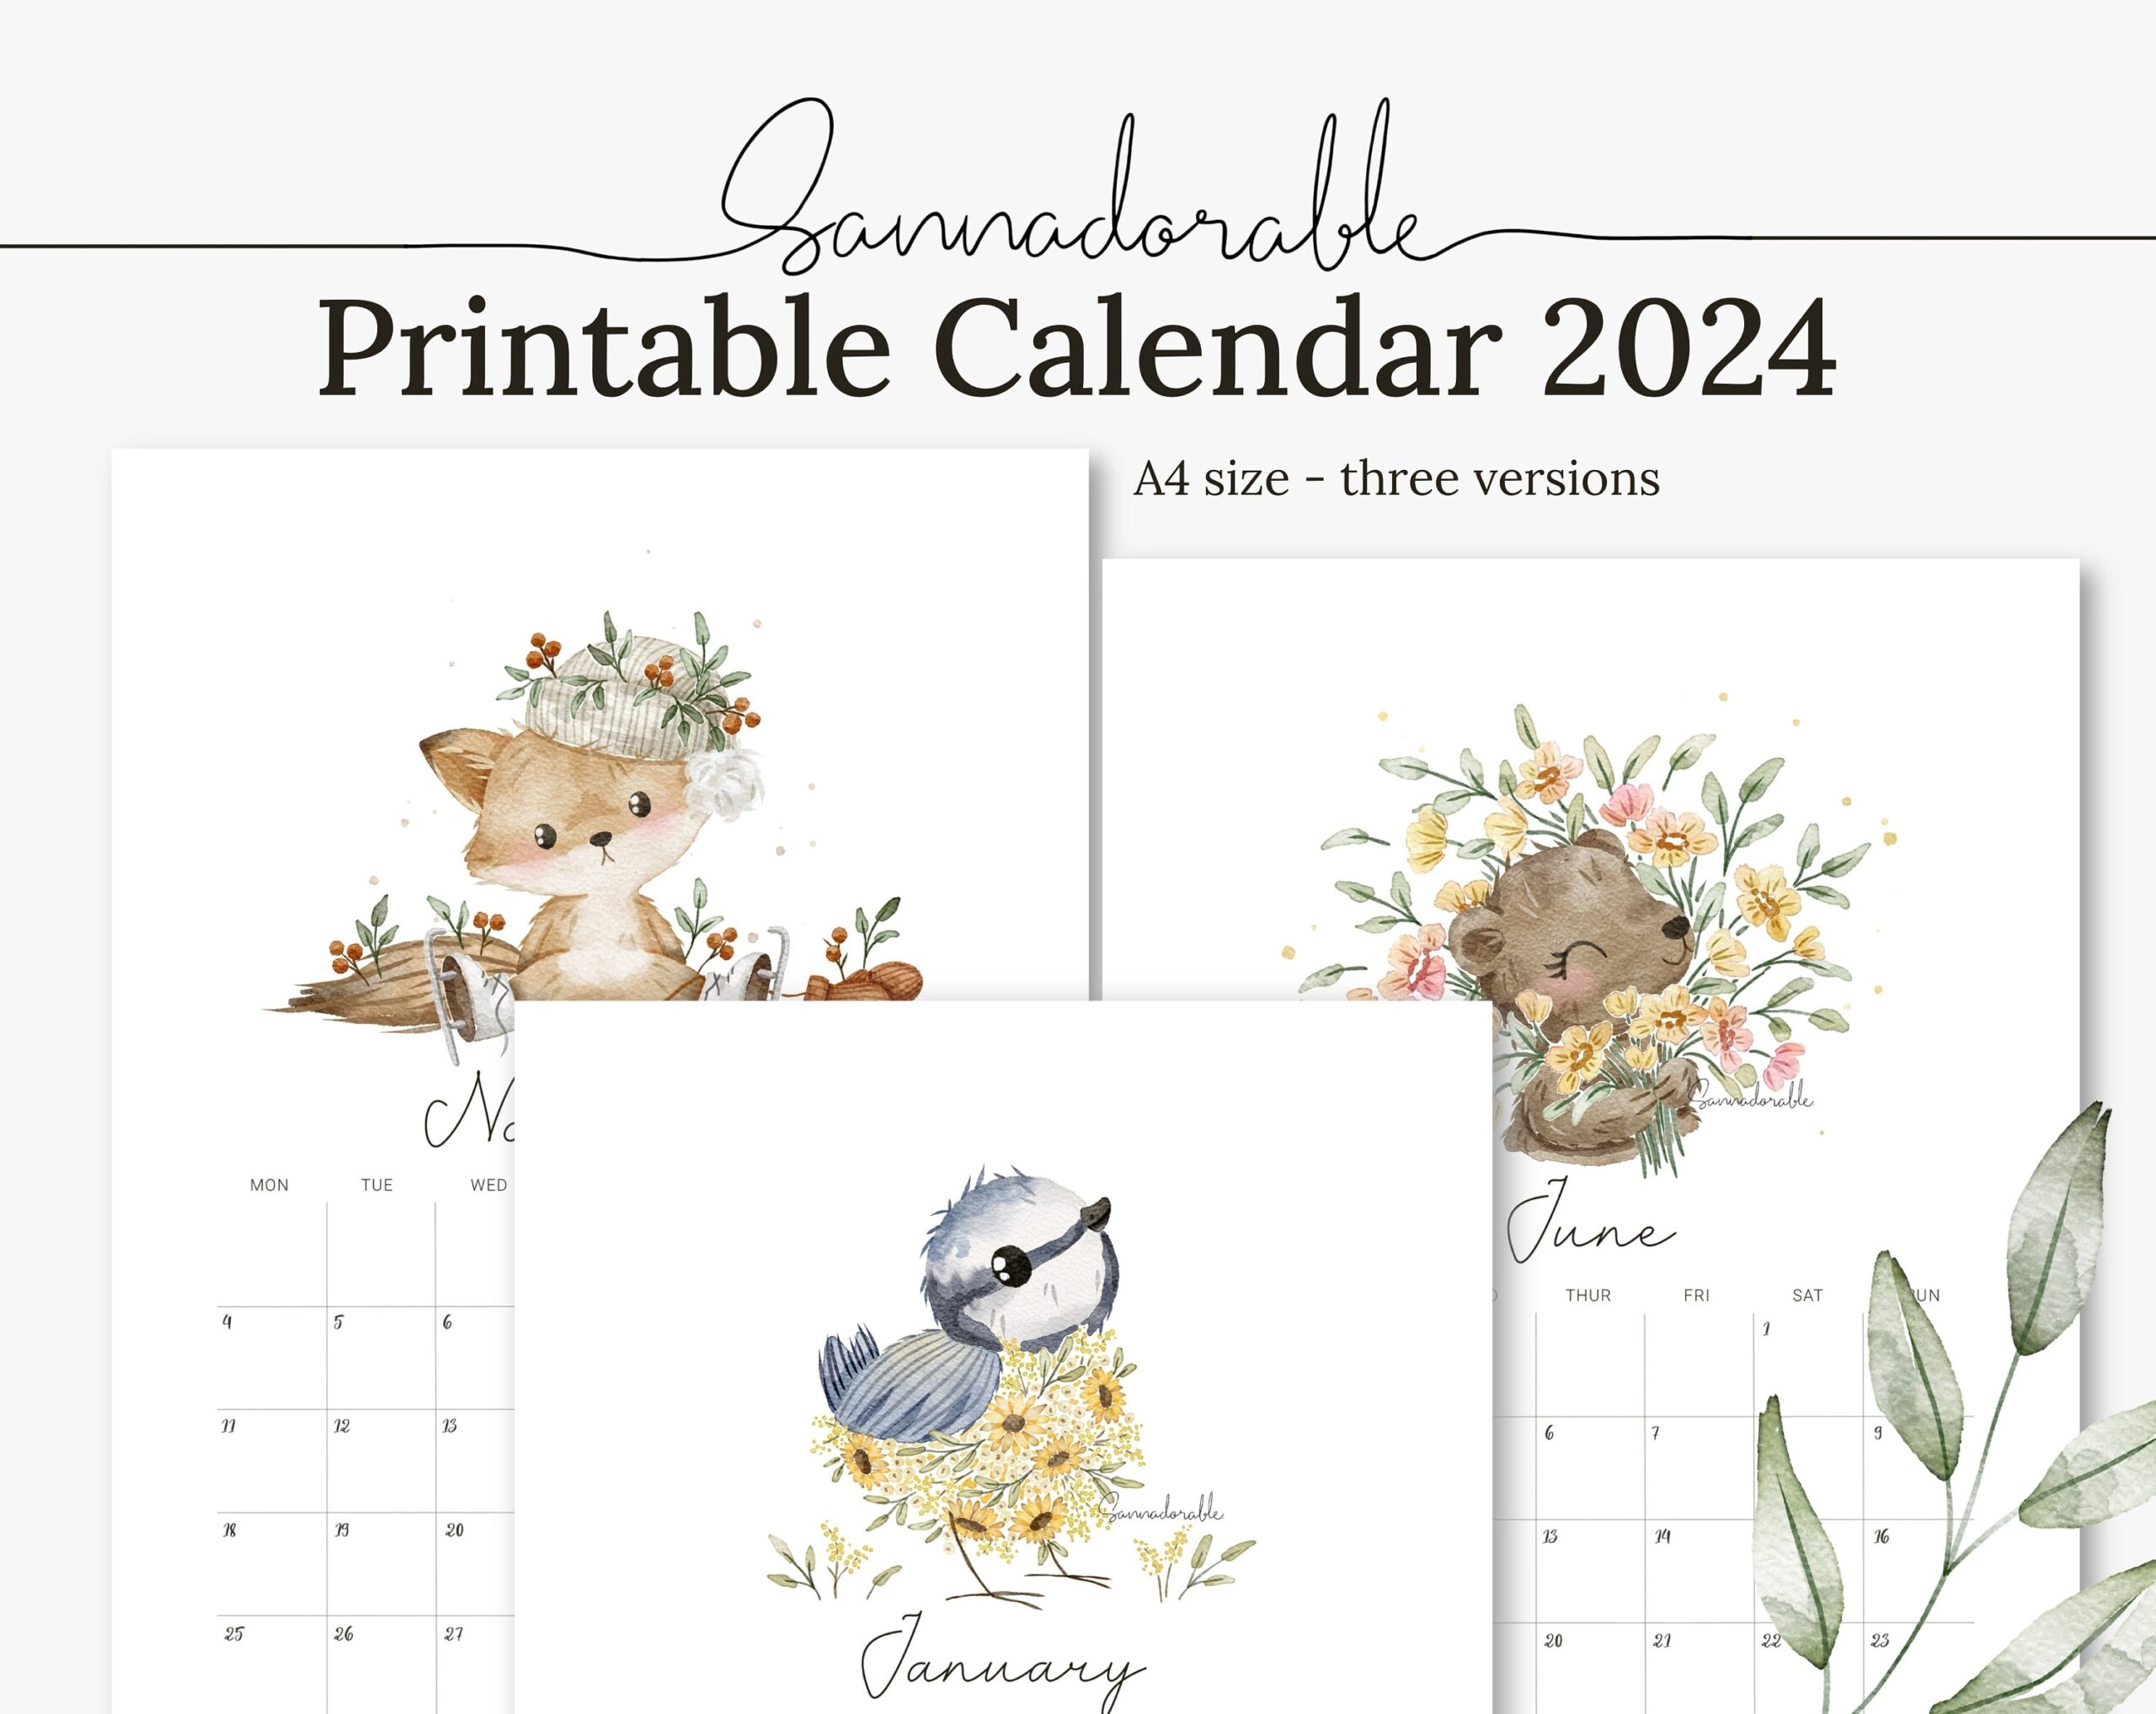 Printable Calendar 2024, Cute Watercolor Illustrations pertaining to Free Printable Calendar 2024 Oh So Lovely